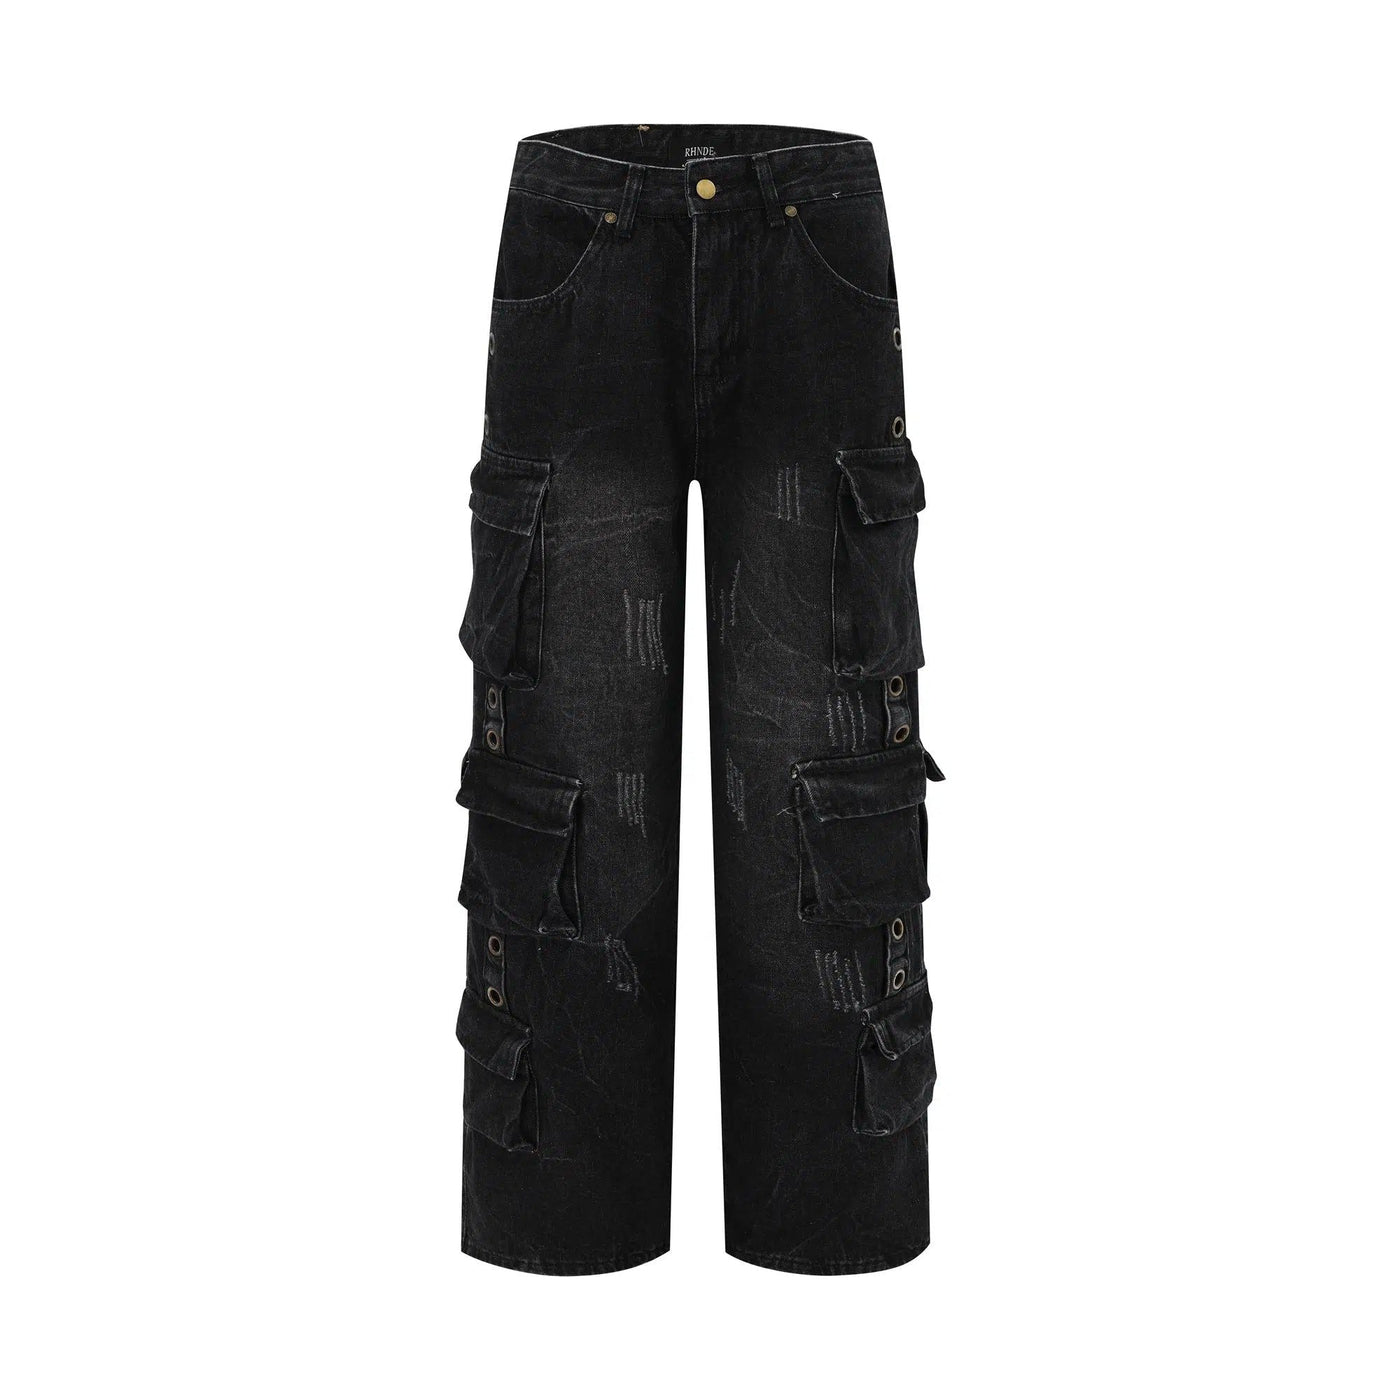 Distressed Utility Cargo Jeans Korean Street Fashion Jeans By Blacklists Shop Online at OH Vault